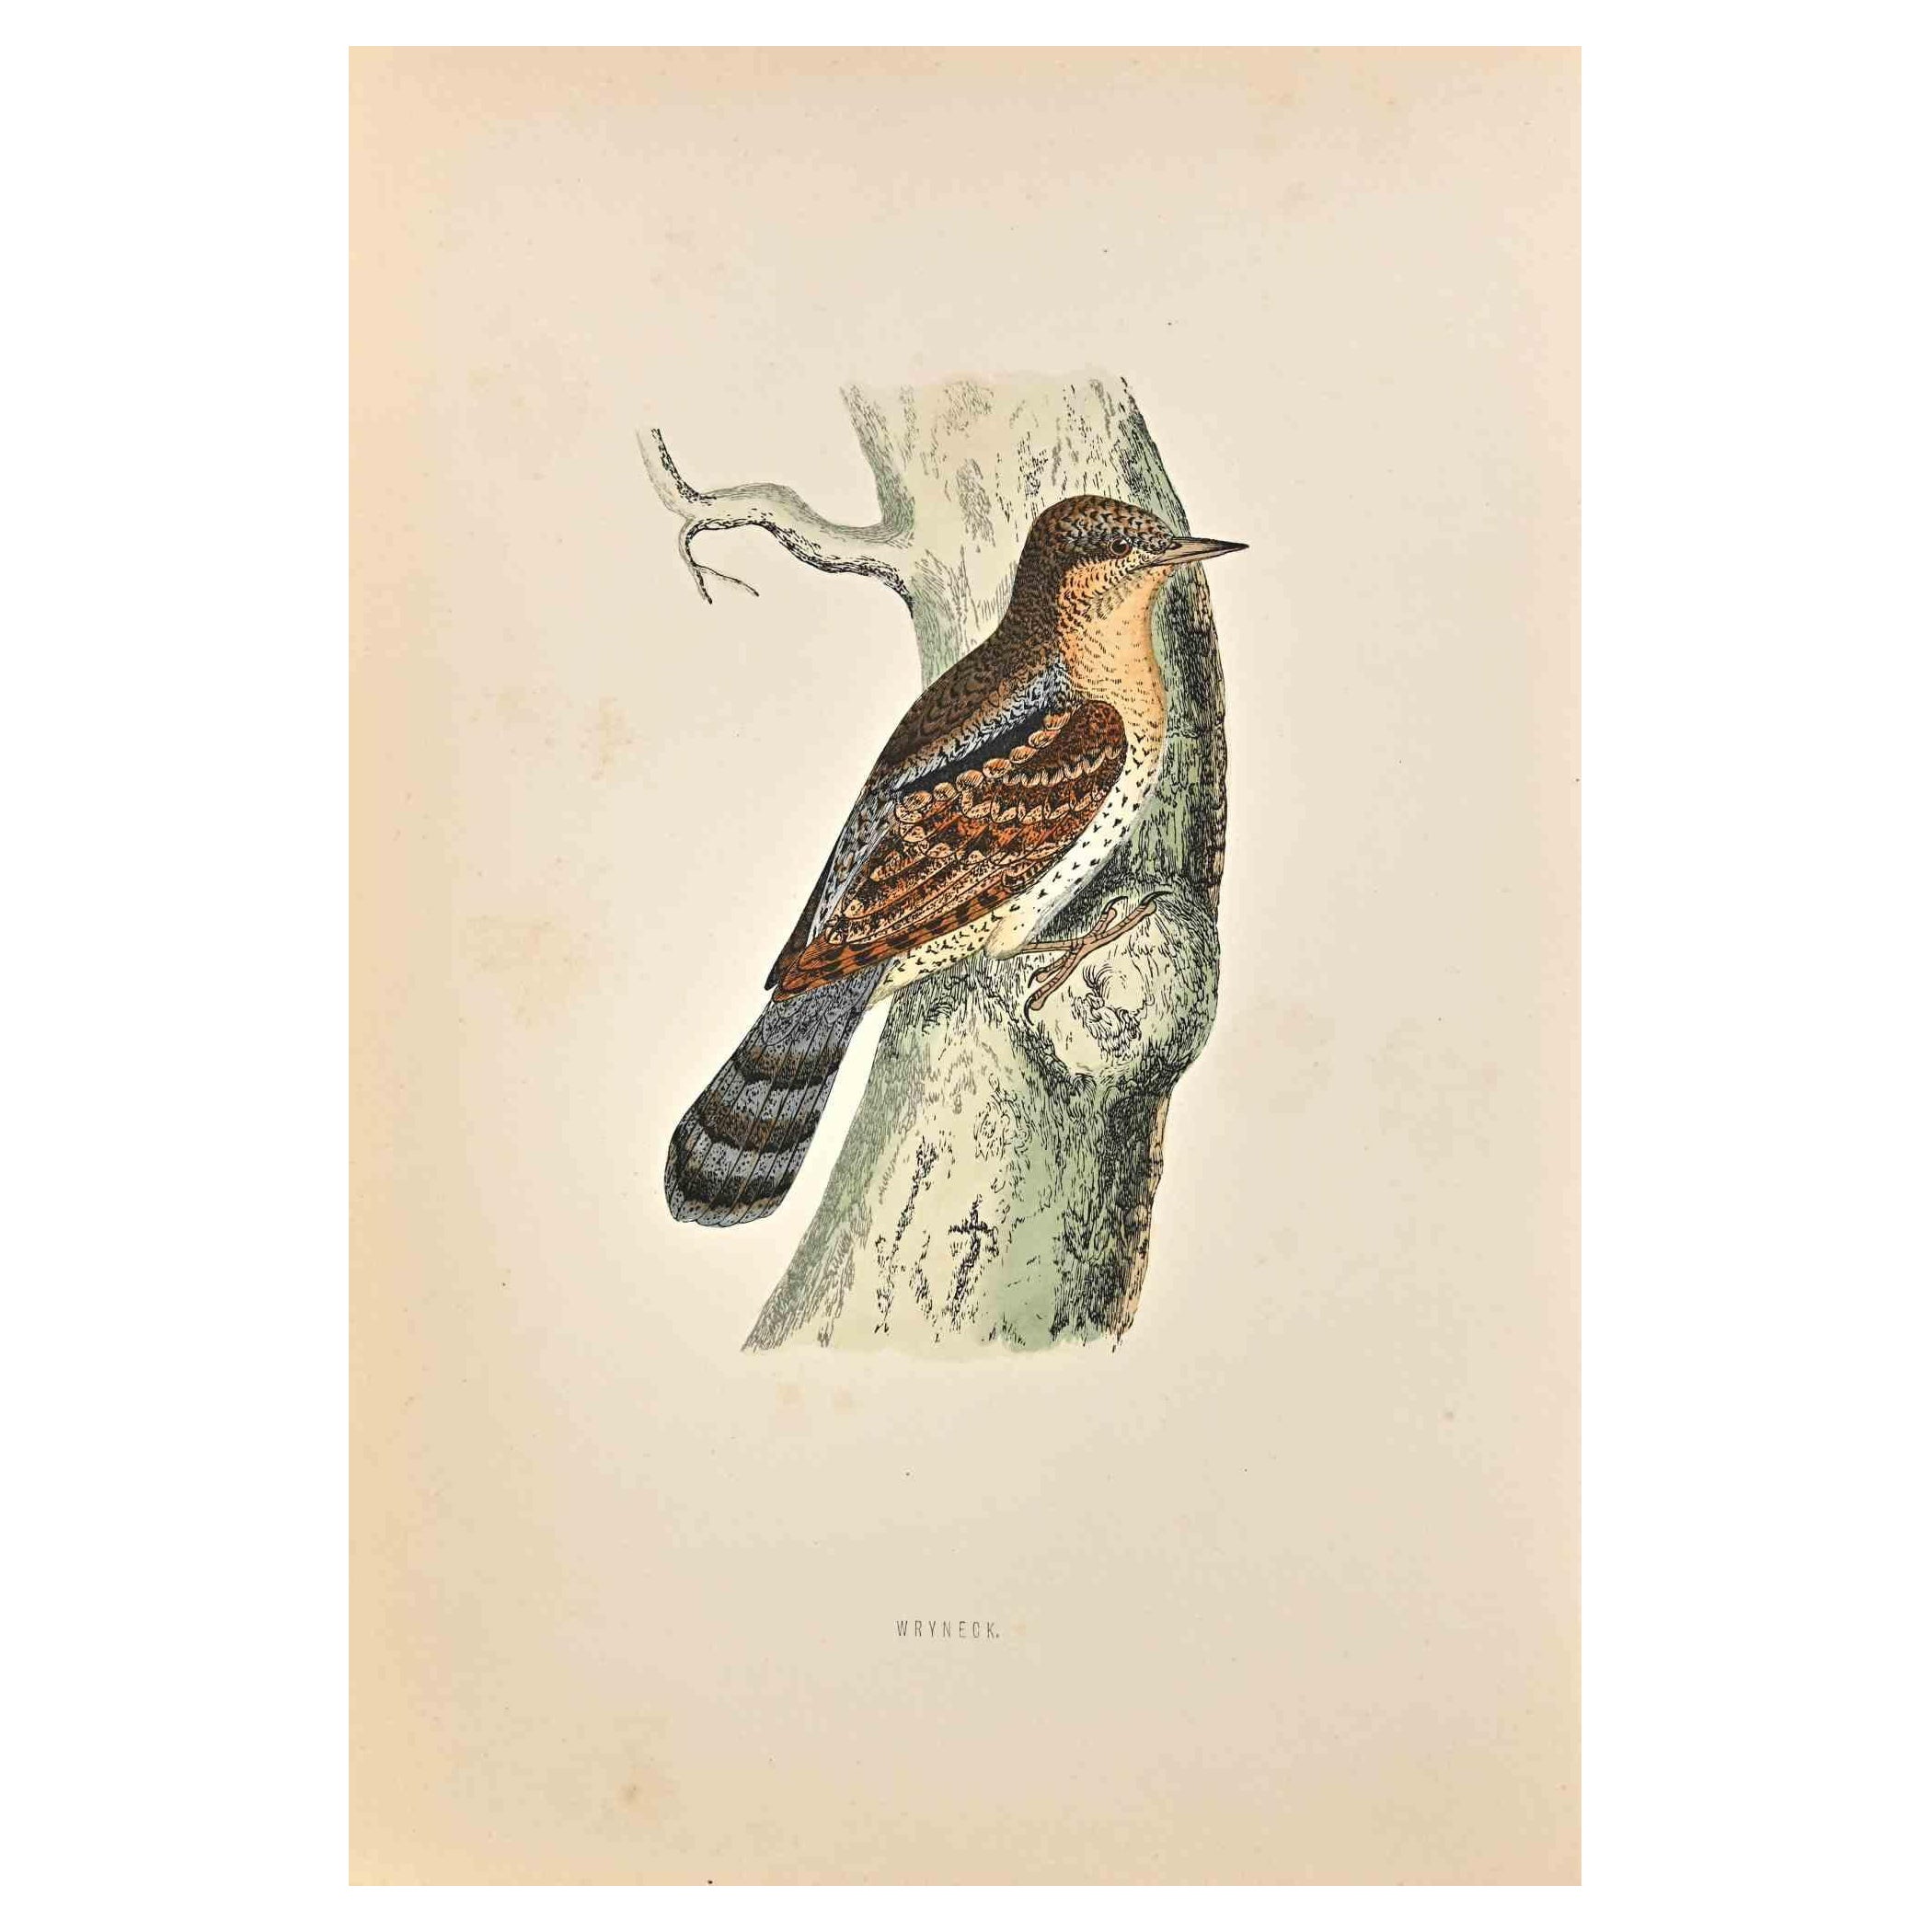 Wryneck is a modern artwork realized in 1870 by the British artist Alexander Francis Lydon (1836-1917) . 

Woodcut print, hand colored, published by London, Bell & Sons, 1870.  Name of the bird printed in plate. This work is part of a print suite